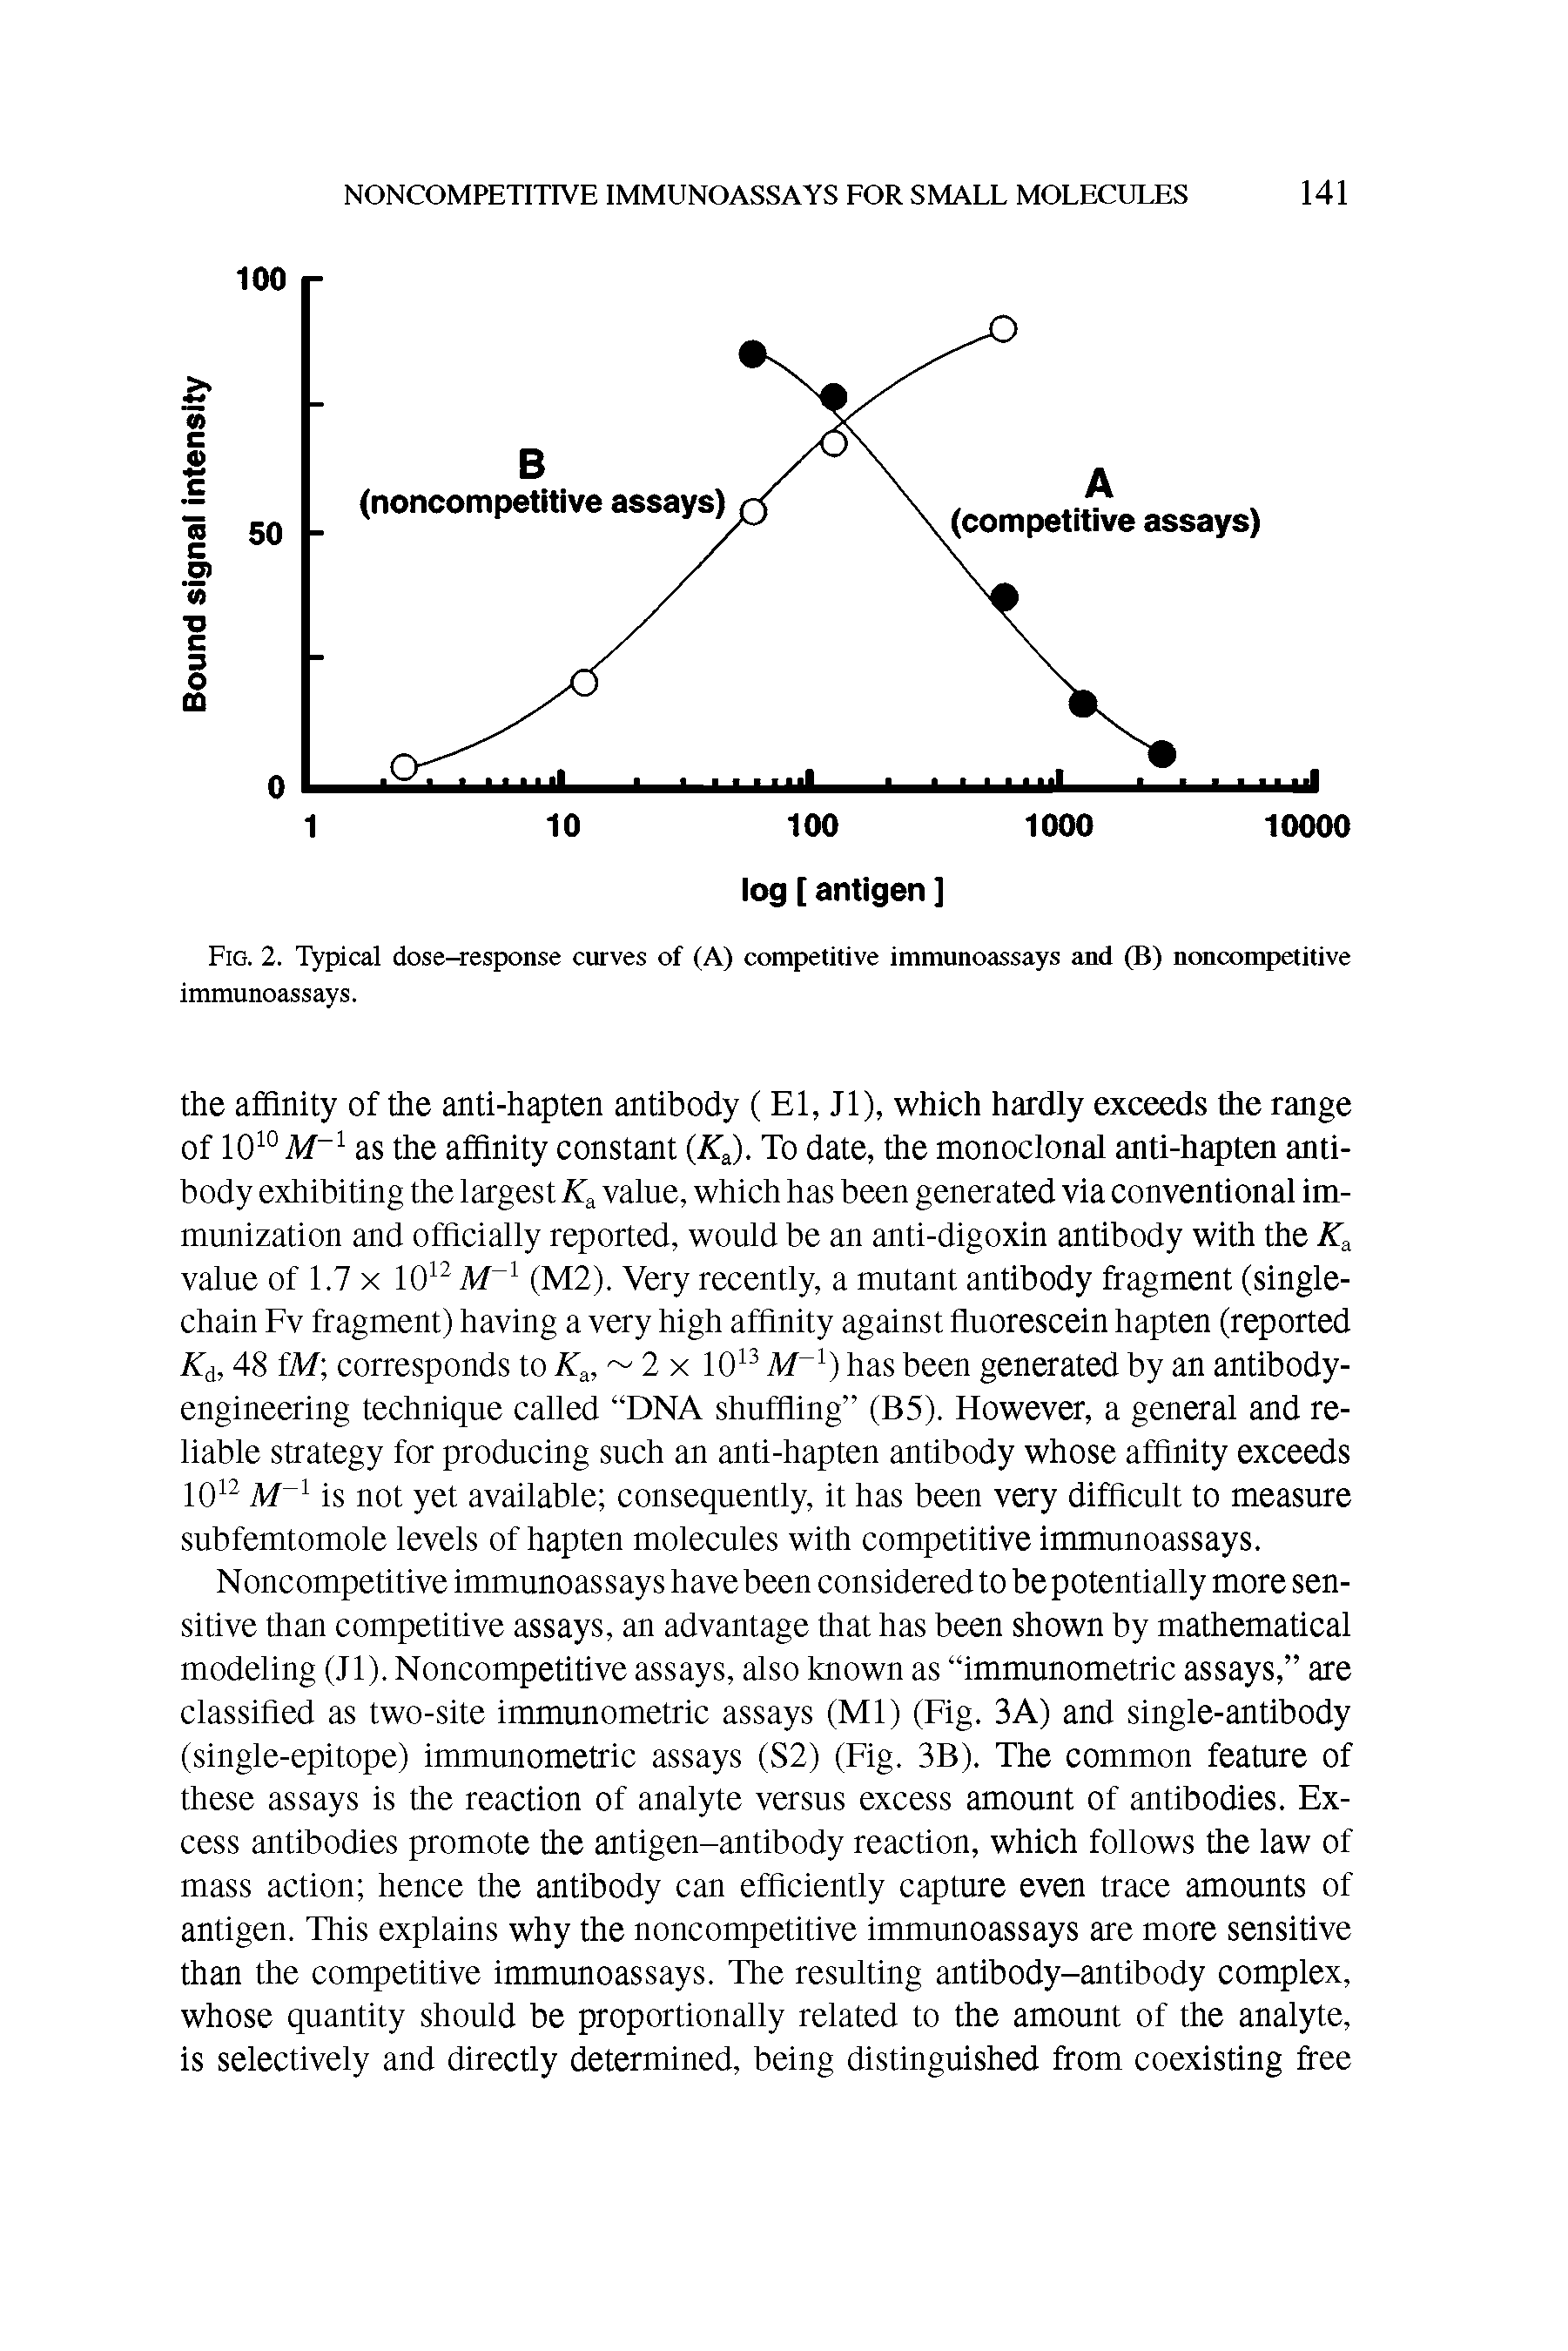 Fig. 2. Typical dose-response curves of (A) competitive immunoassays and (B) noncompetitive immunoassays.